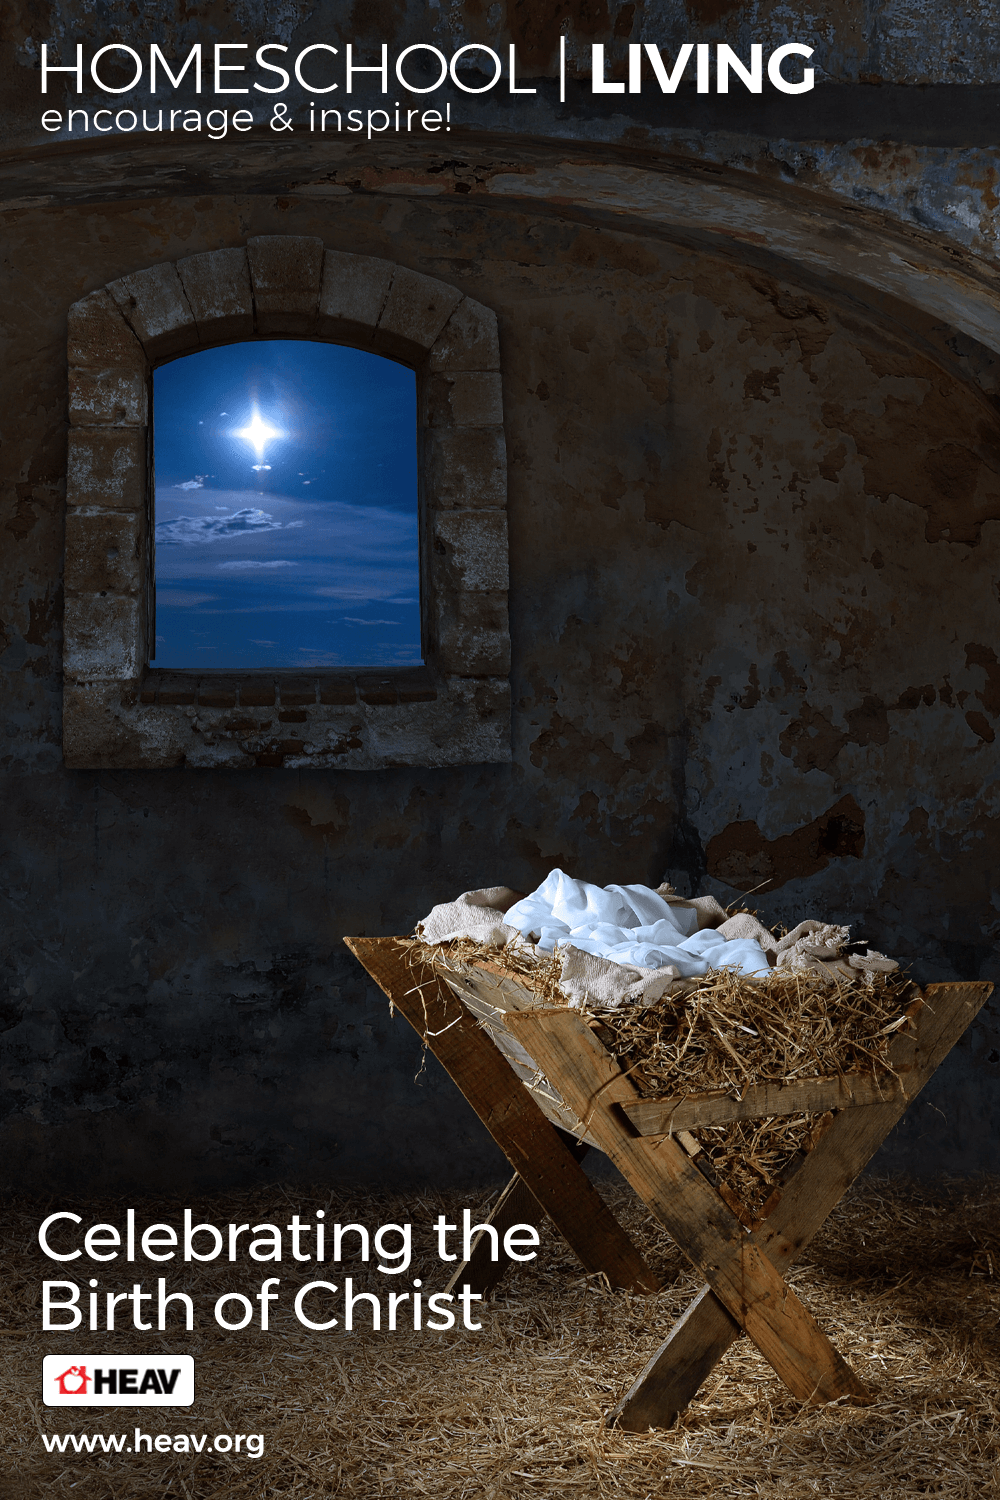 advent-Celebrating-the-Birth-of-Christ-homeschool-living-email